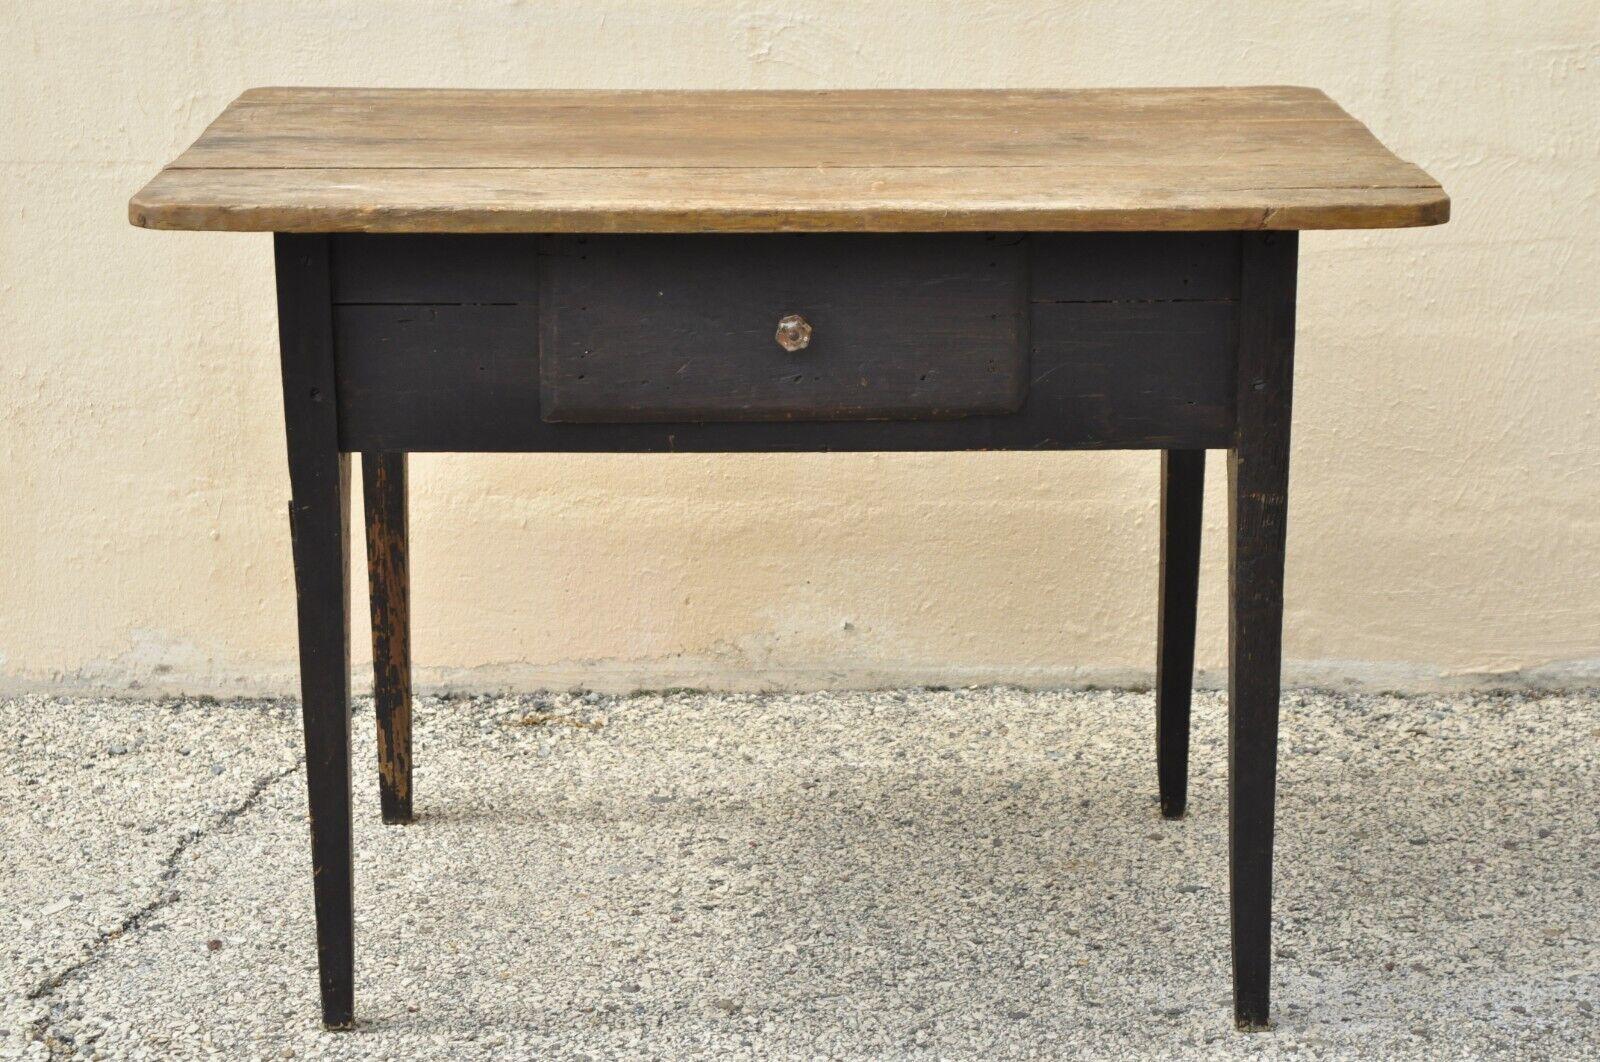 Antique French Country Rustic Black Distress Painted 1 Drawer Breakfast Table. Item features a wooden plank top, black distress painted base, glass drawer pull, 1 drawer, tapered legs, very nice antique item. Circa 19th Century. Measurements: 29.5